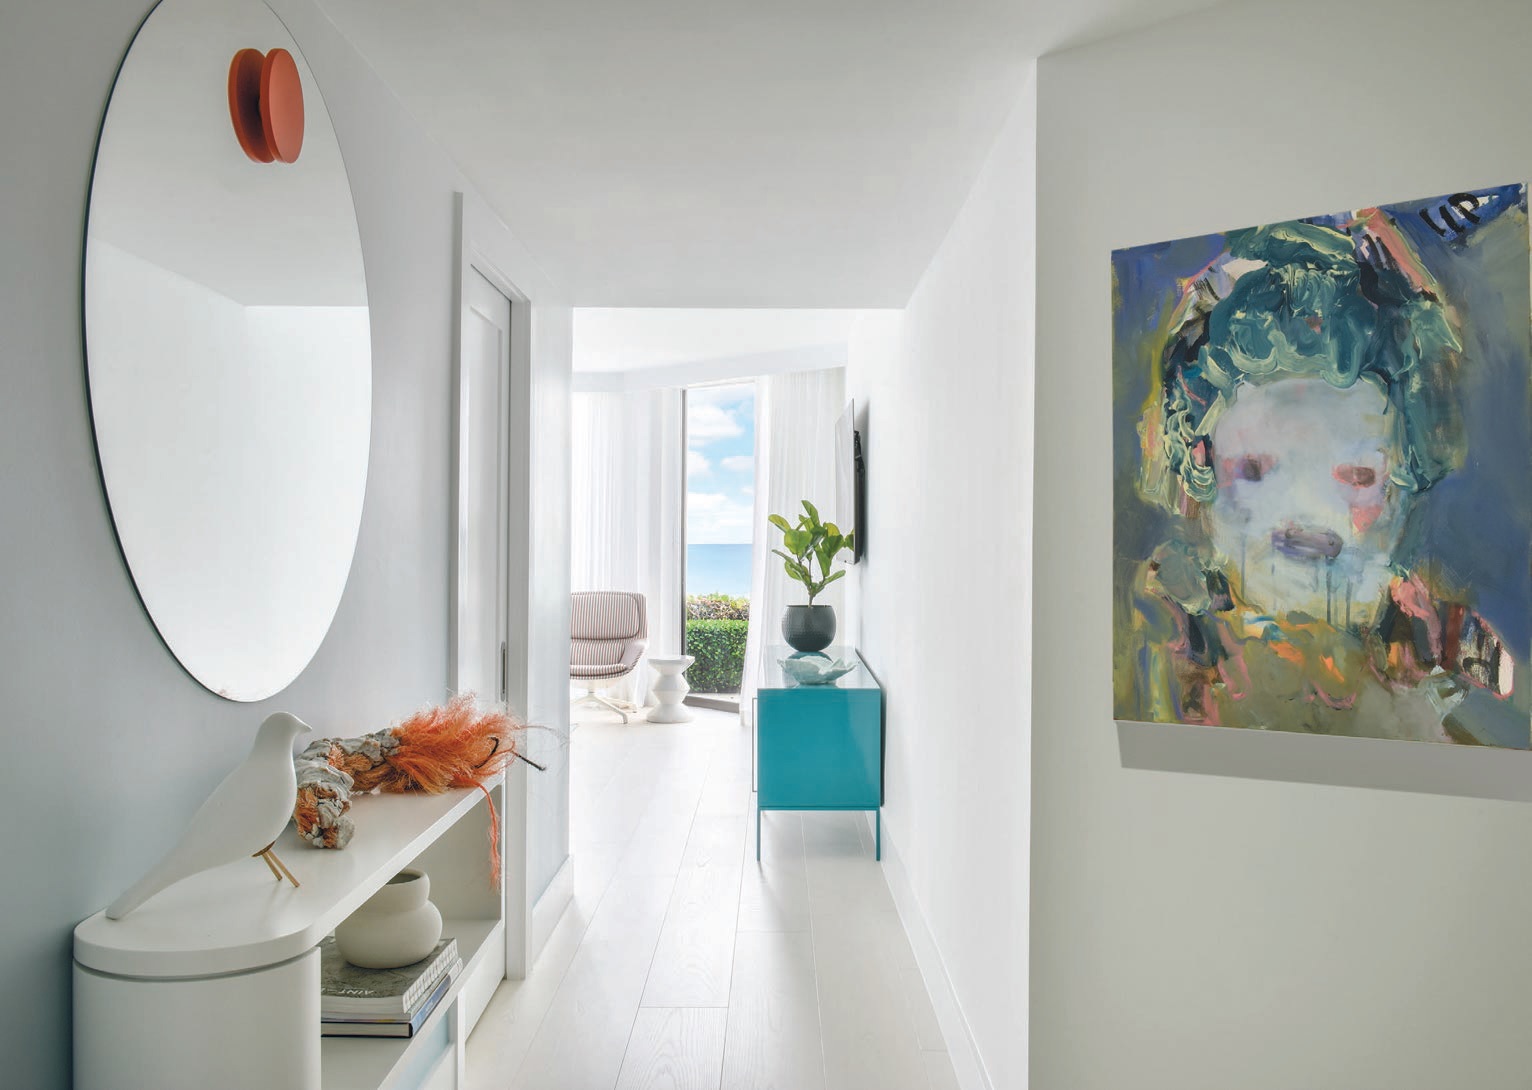 A mirror from Collector signals the primary bedroom along with art by Menghan Qi from SCAD Art Sales. PHOTOGRAPHED BY KEN HAYDEN